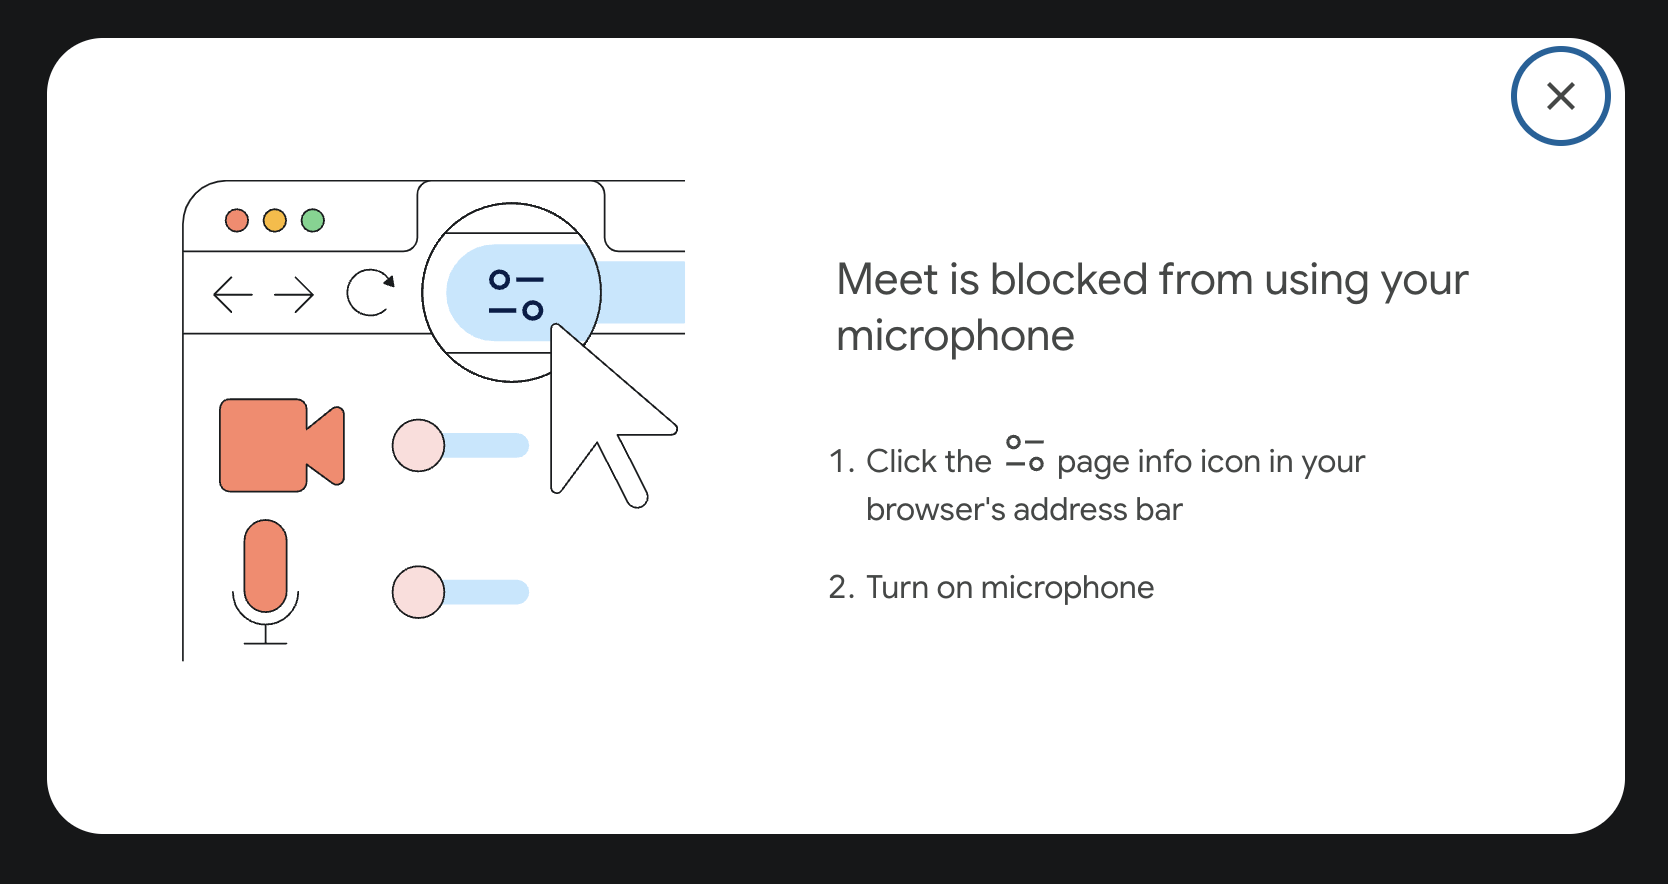 Google Meet instructions on how to open Chrome site controls.